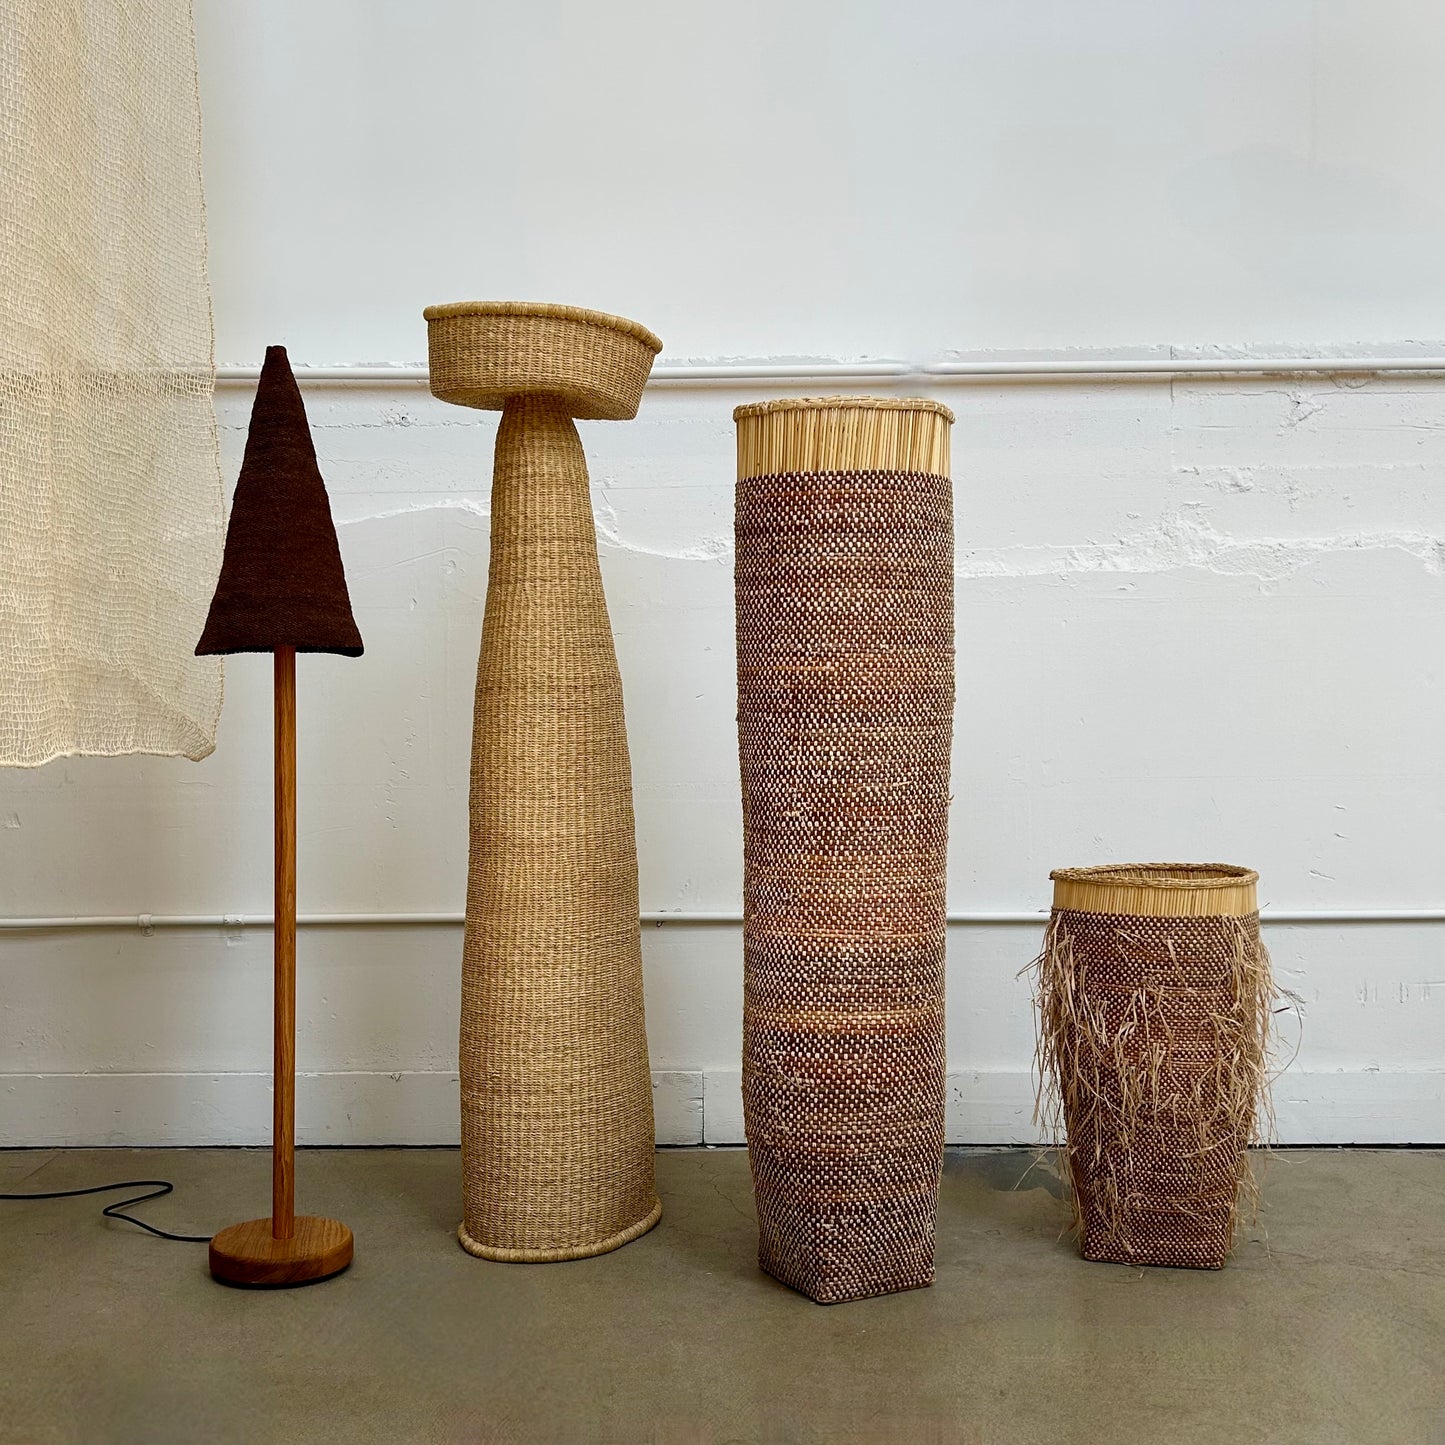 oversized baskets and handwoven lamp